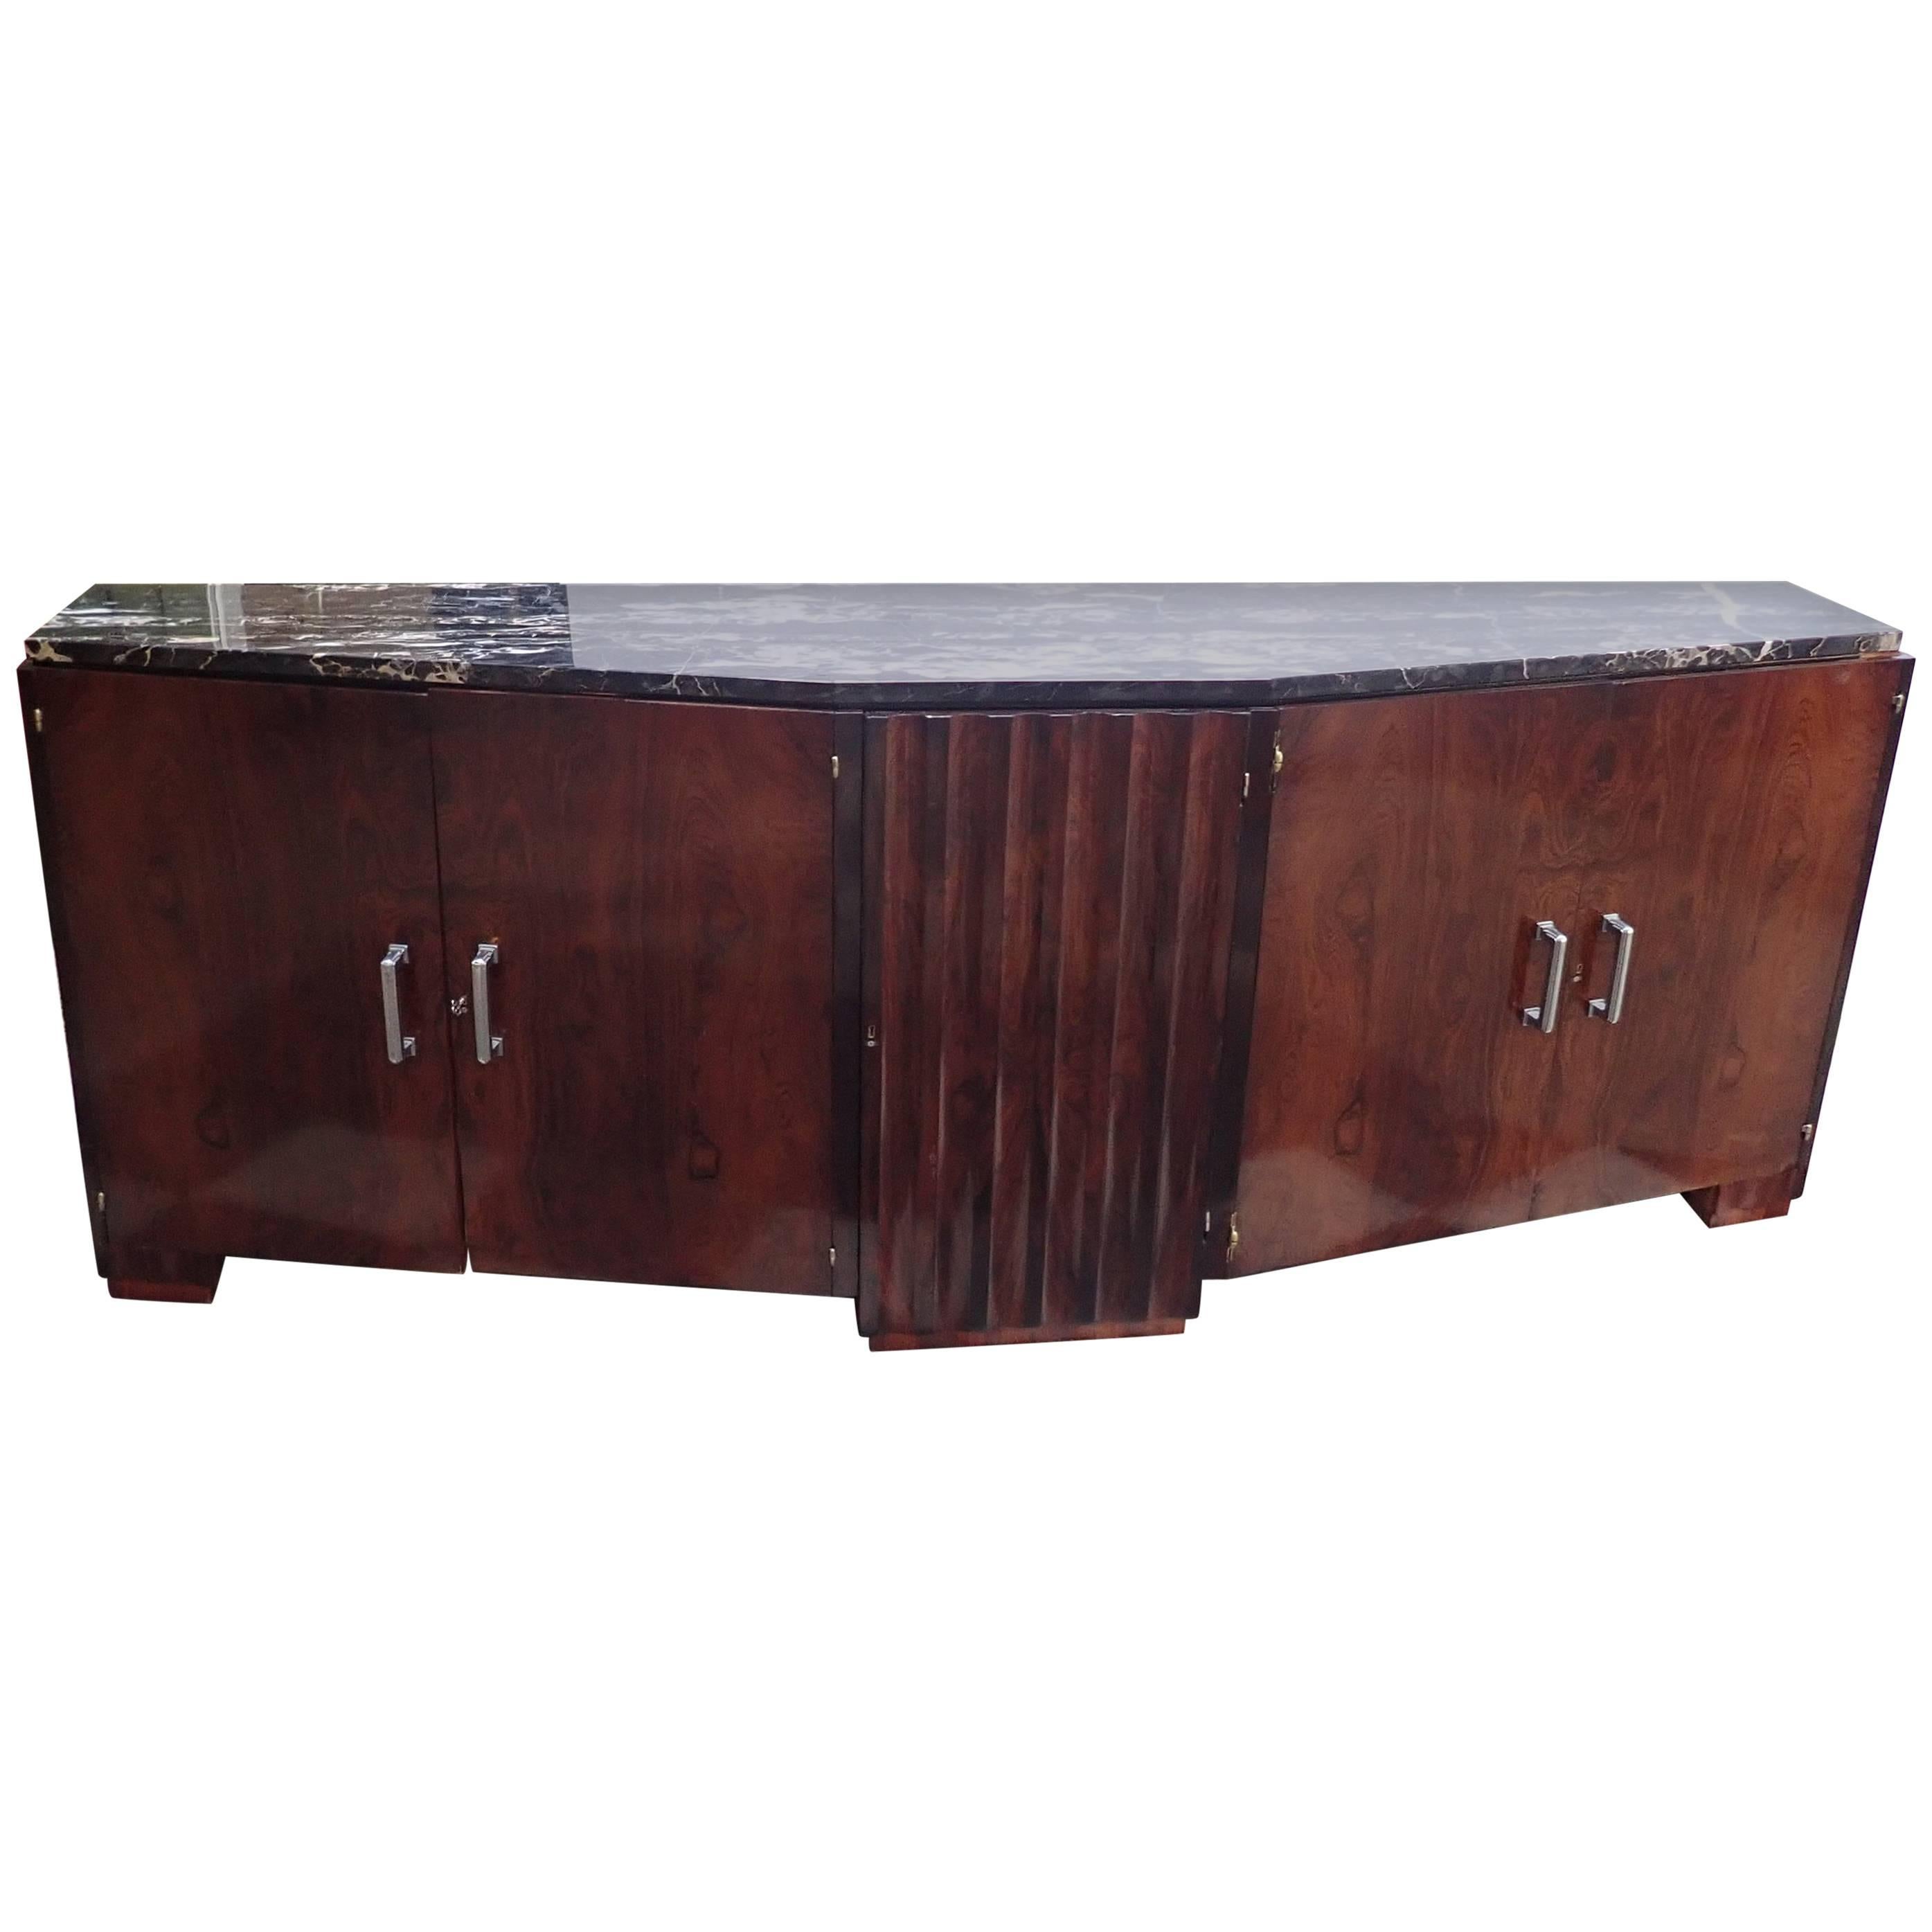 French Art Deco Portoro Bouno Marble-Top Rosewood Buffet or Sideboard